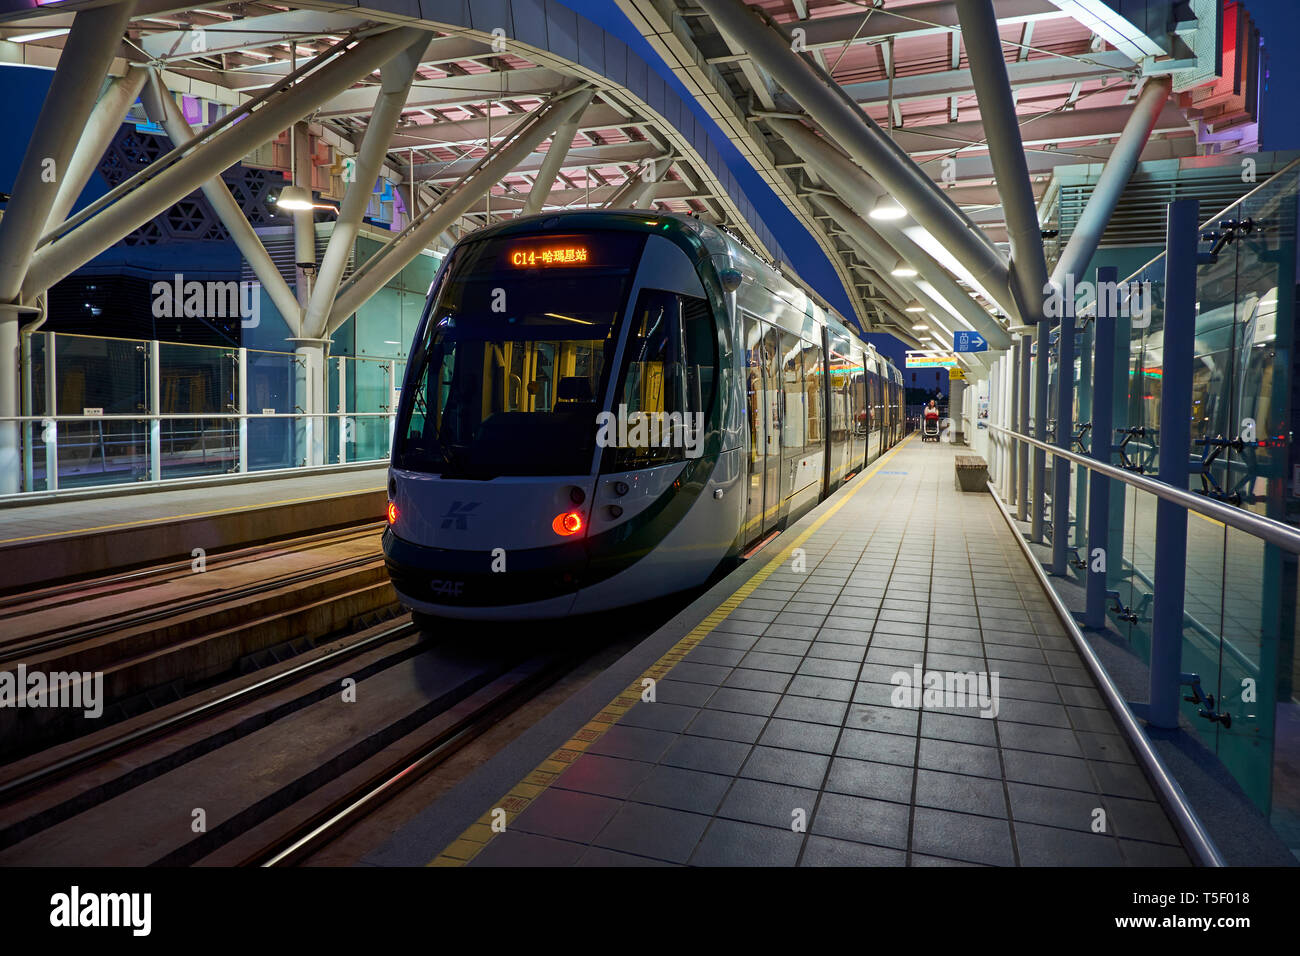 A light rail train pulls into a station at night, part of the Kaohsiung MRT system. Stock Photo